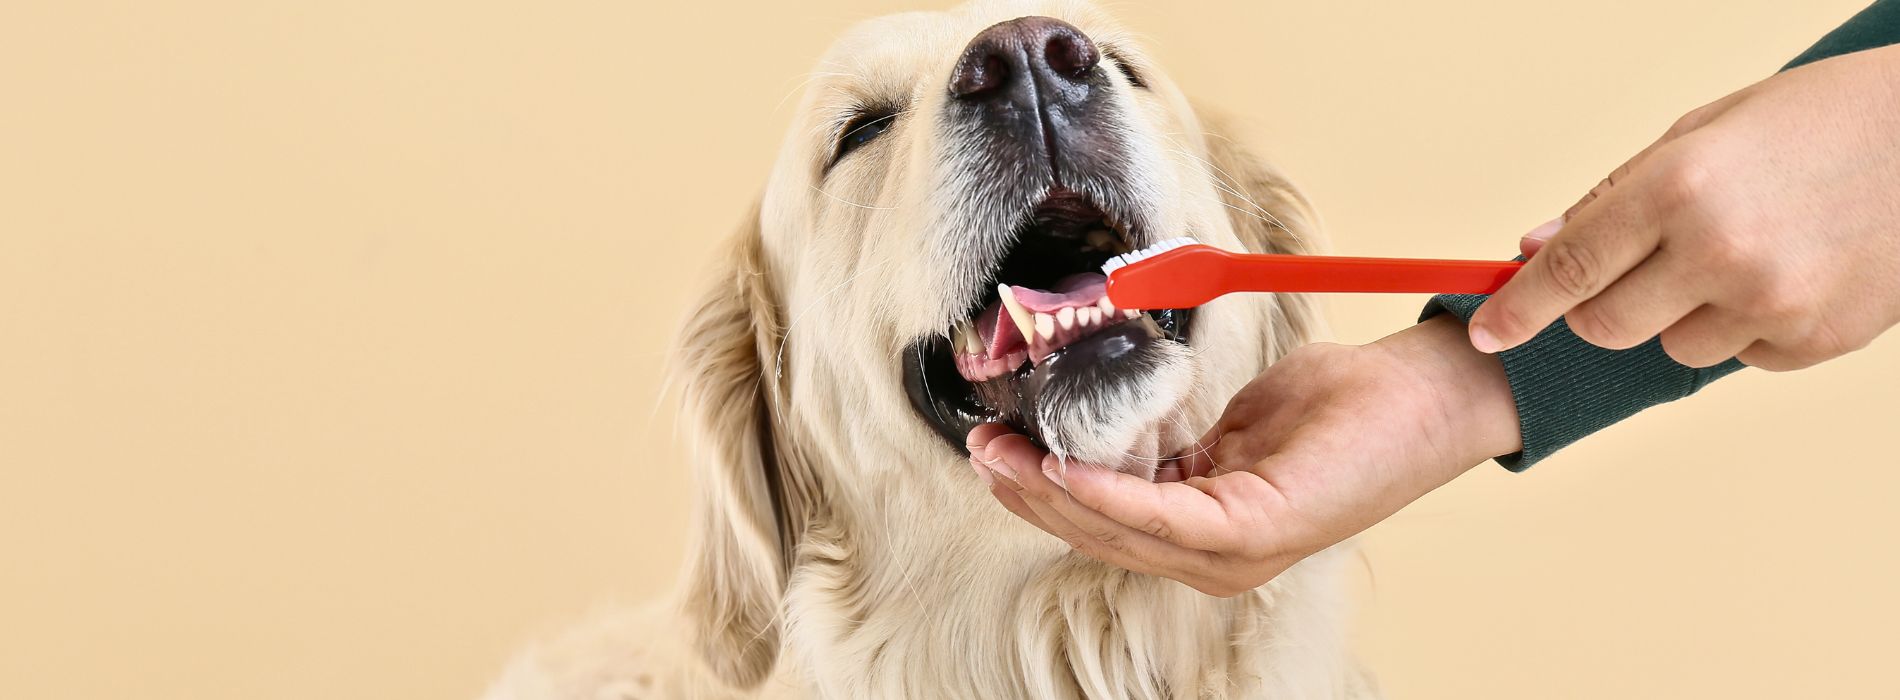 How to brush your Dogs Teeth | The Complete Guide